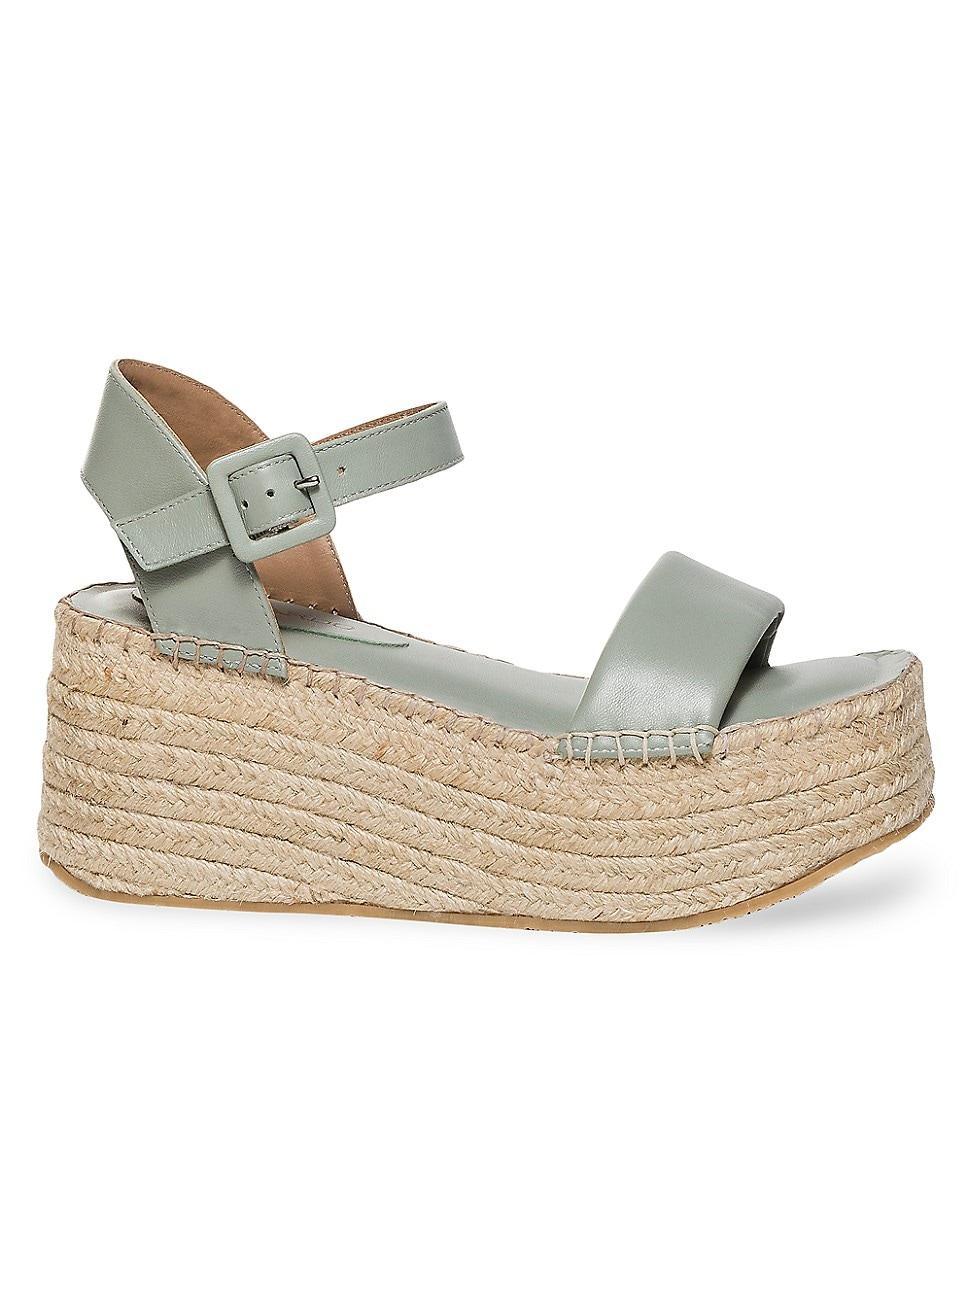 Womens Mallorca Leather Espadrille Sandals Product Image